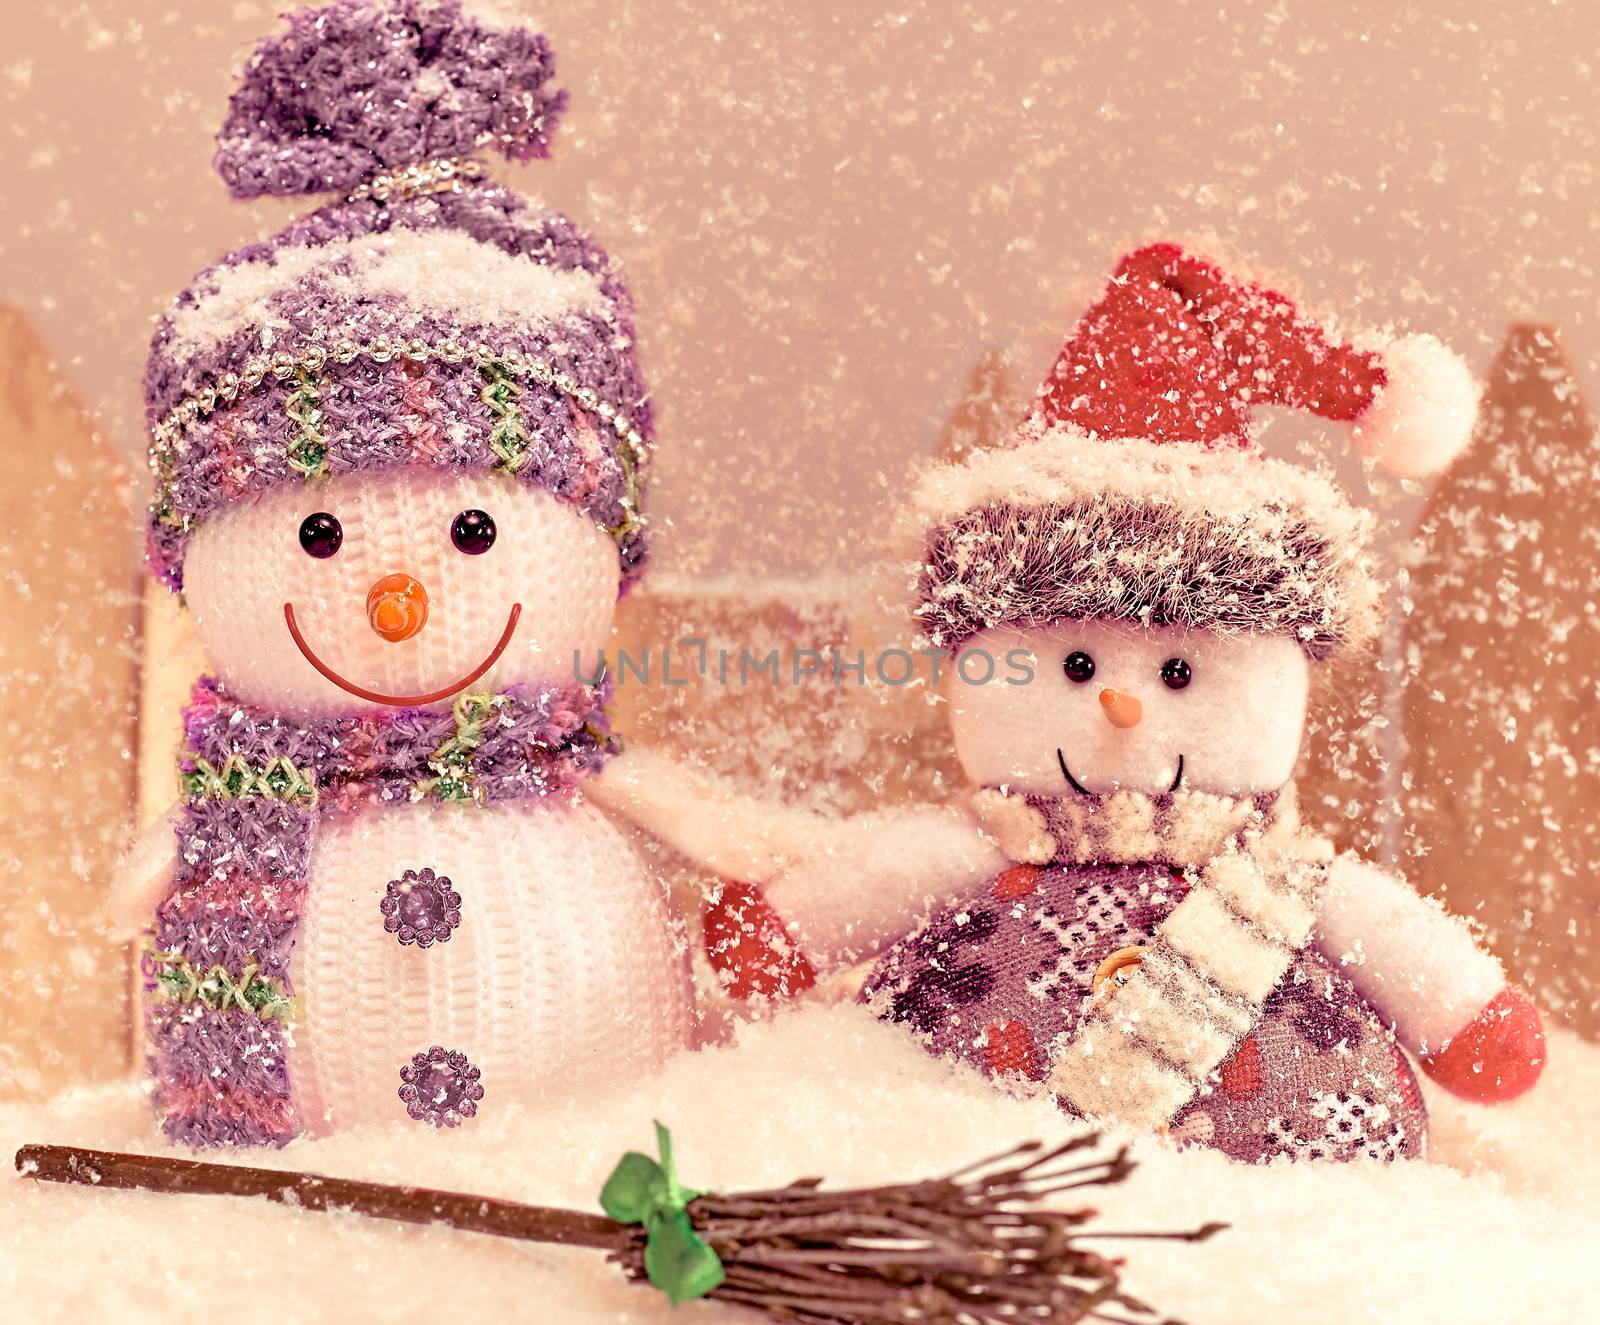 New Year 2016. Merry Christmas. Happy two snowman smiling, friendship on snow, in Santa hat with broom. Cheerful fun winter holiday celebration, snowfall. Retro, vintage, grain effect. Greeting card